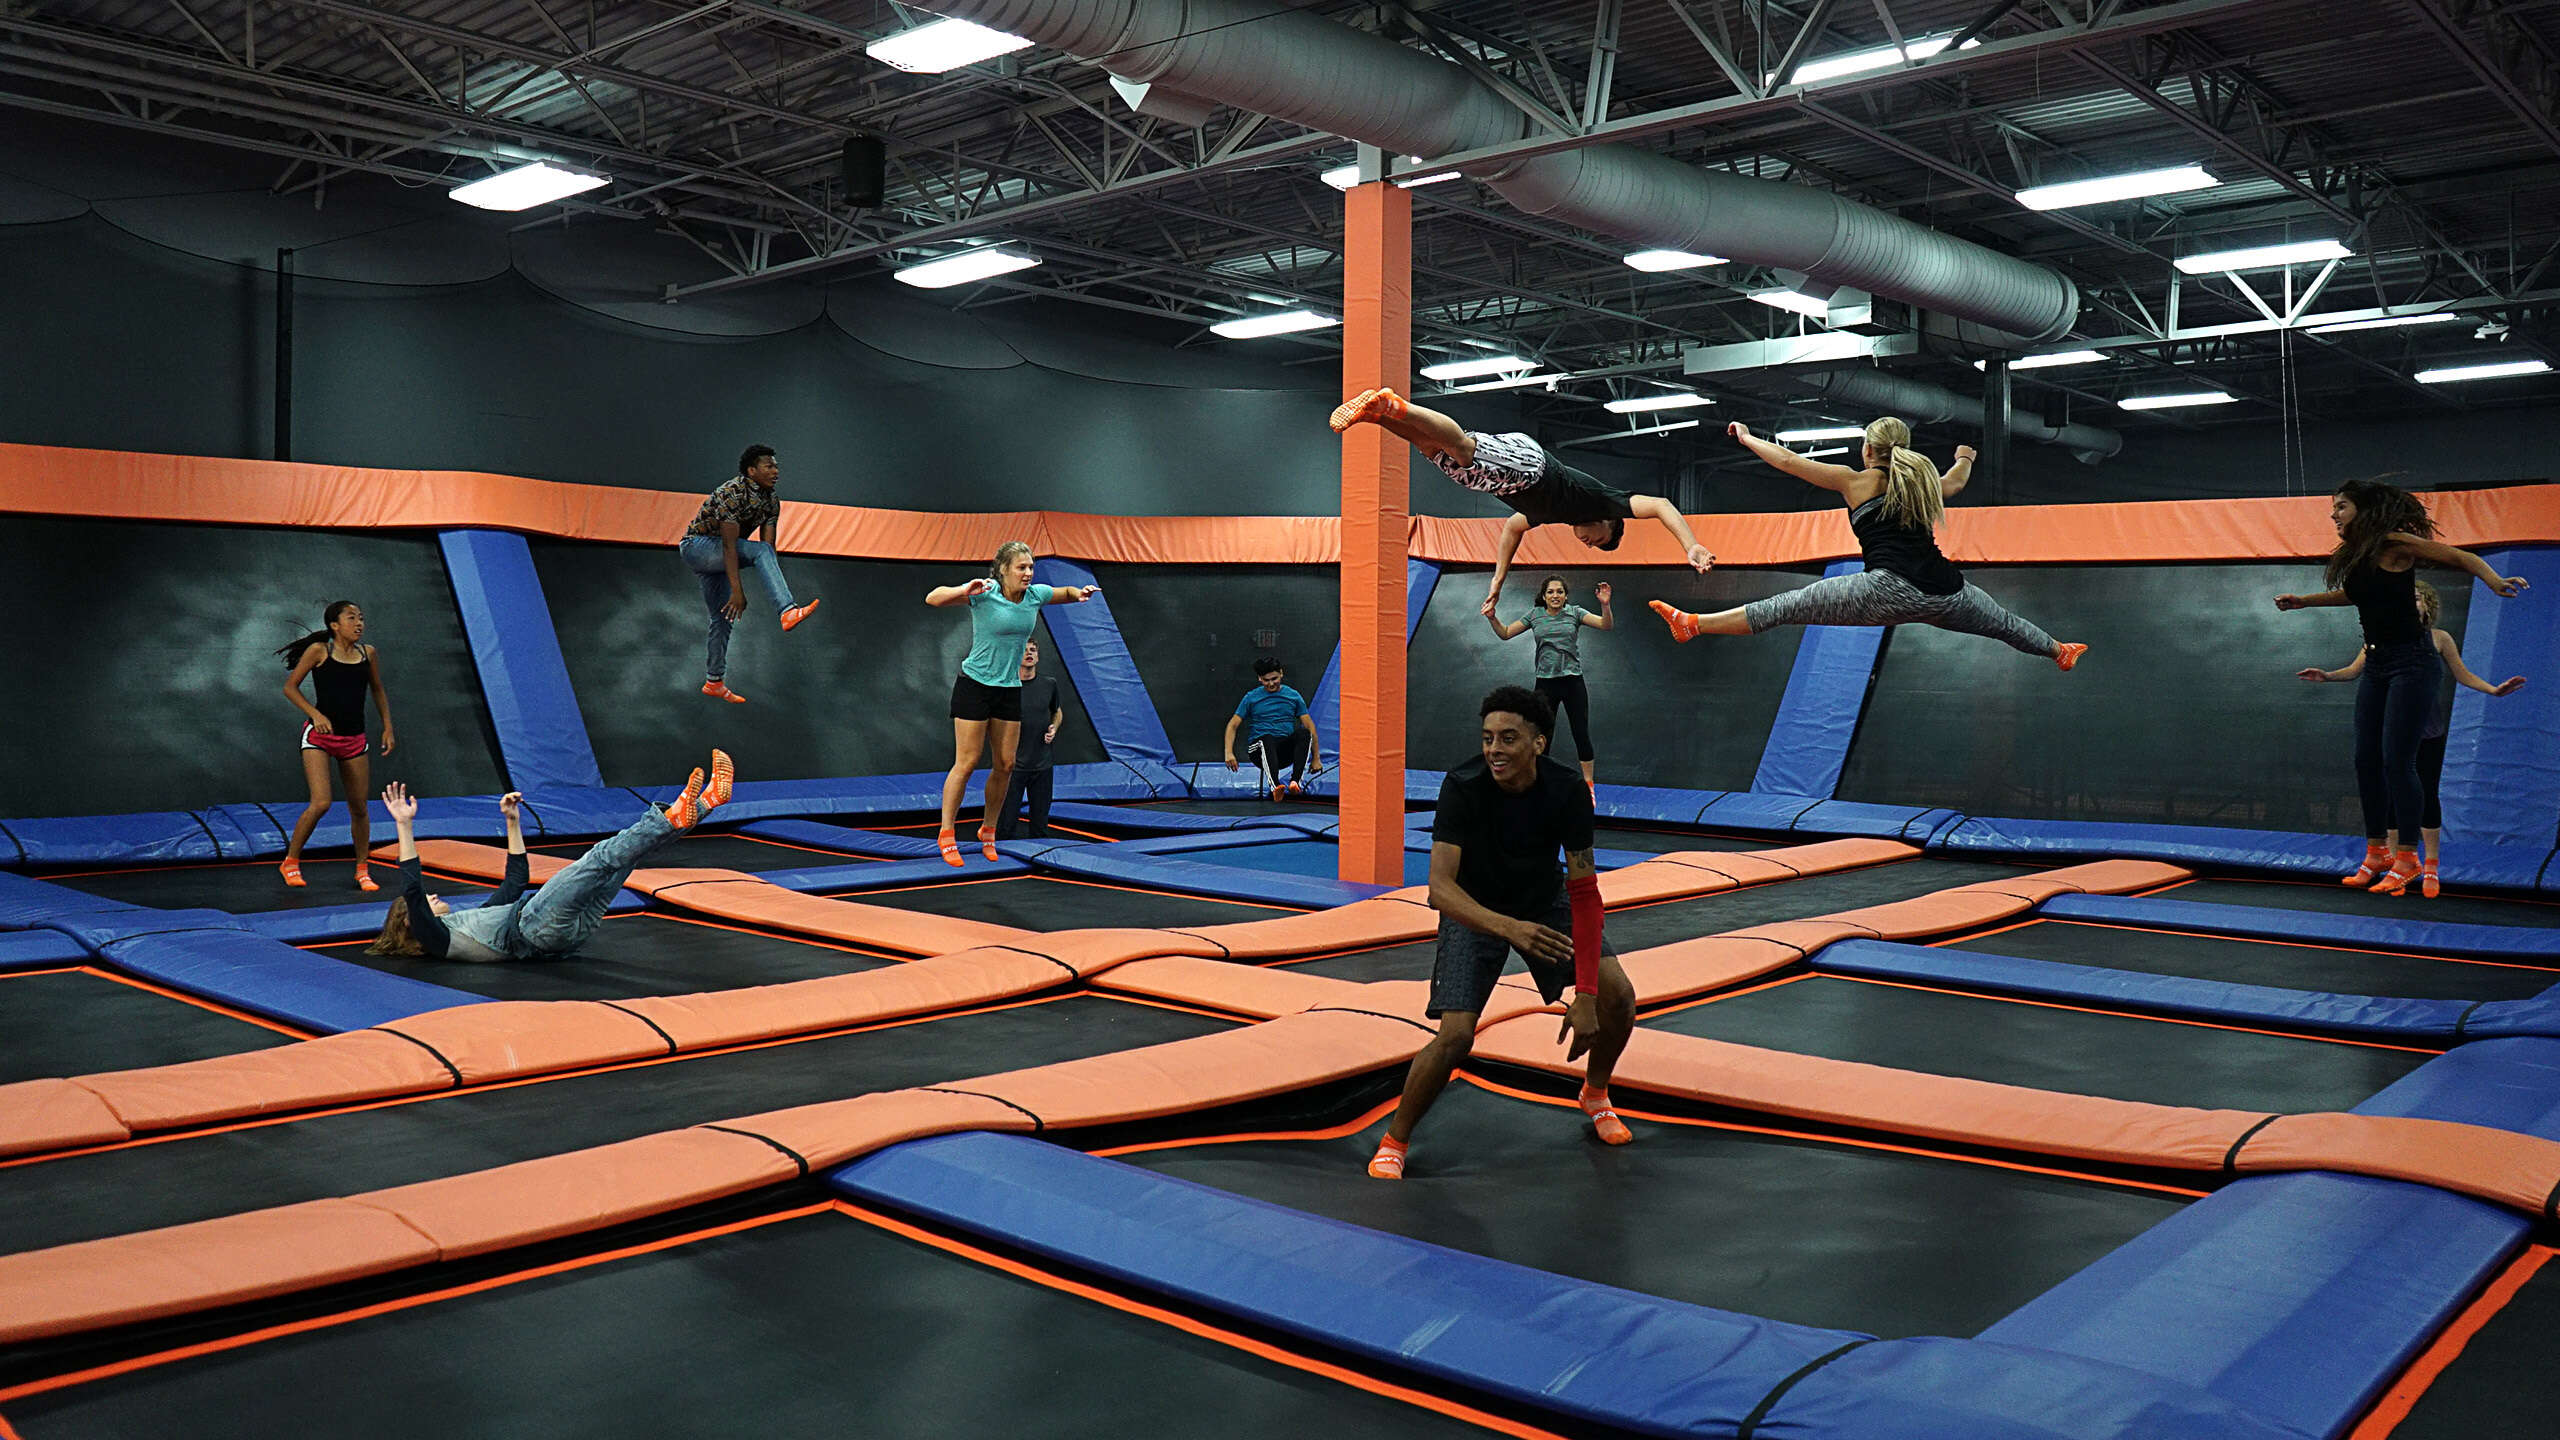 Multiple kids jumping at a SkyZone Trampoline Park.